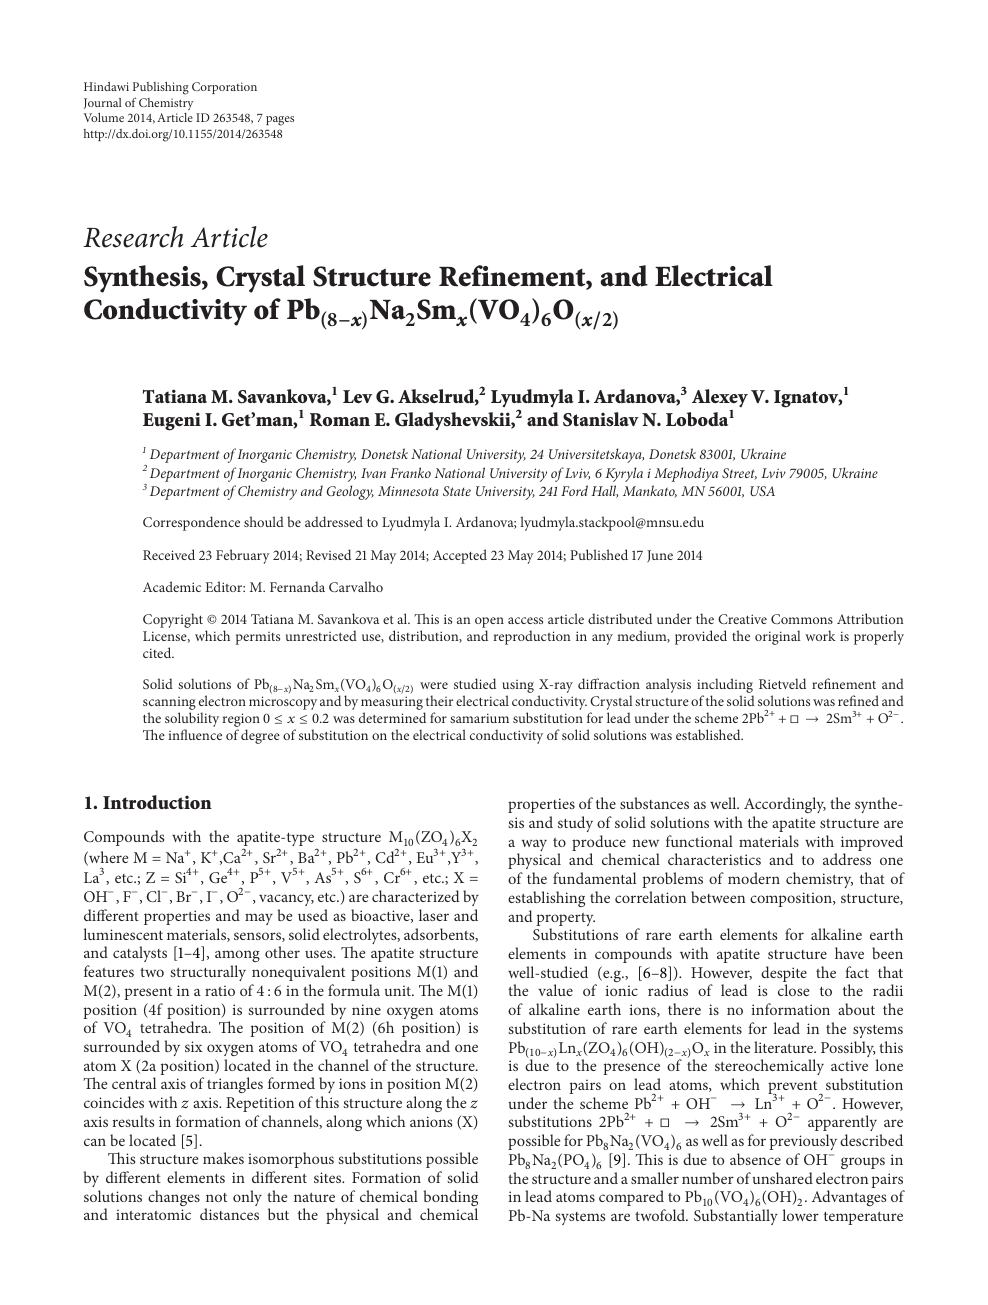 Synthesis Crystal Structure Refinement And Electrical Conductivity Of Pb 8 X Na2smx Vo4 6o X 2 Topic Of Research Paper In Chemical Sciences Download Scholarly Article Pdf And Read For Free On Cyberleninka Open Science Hub